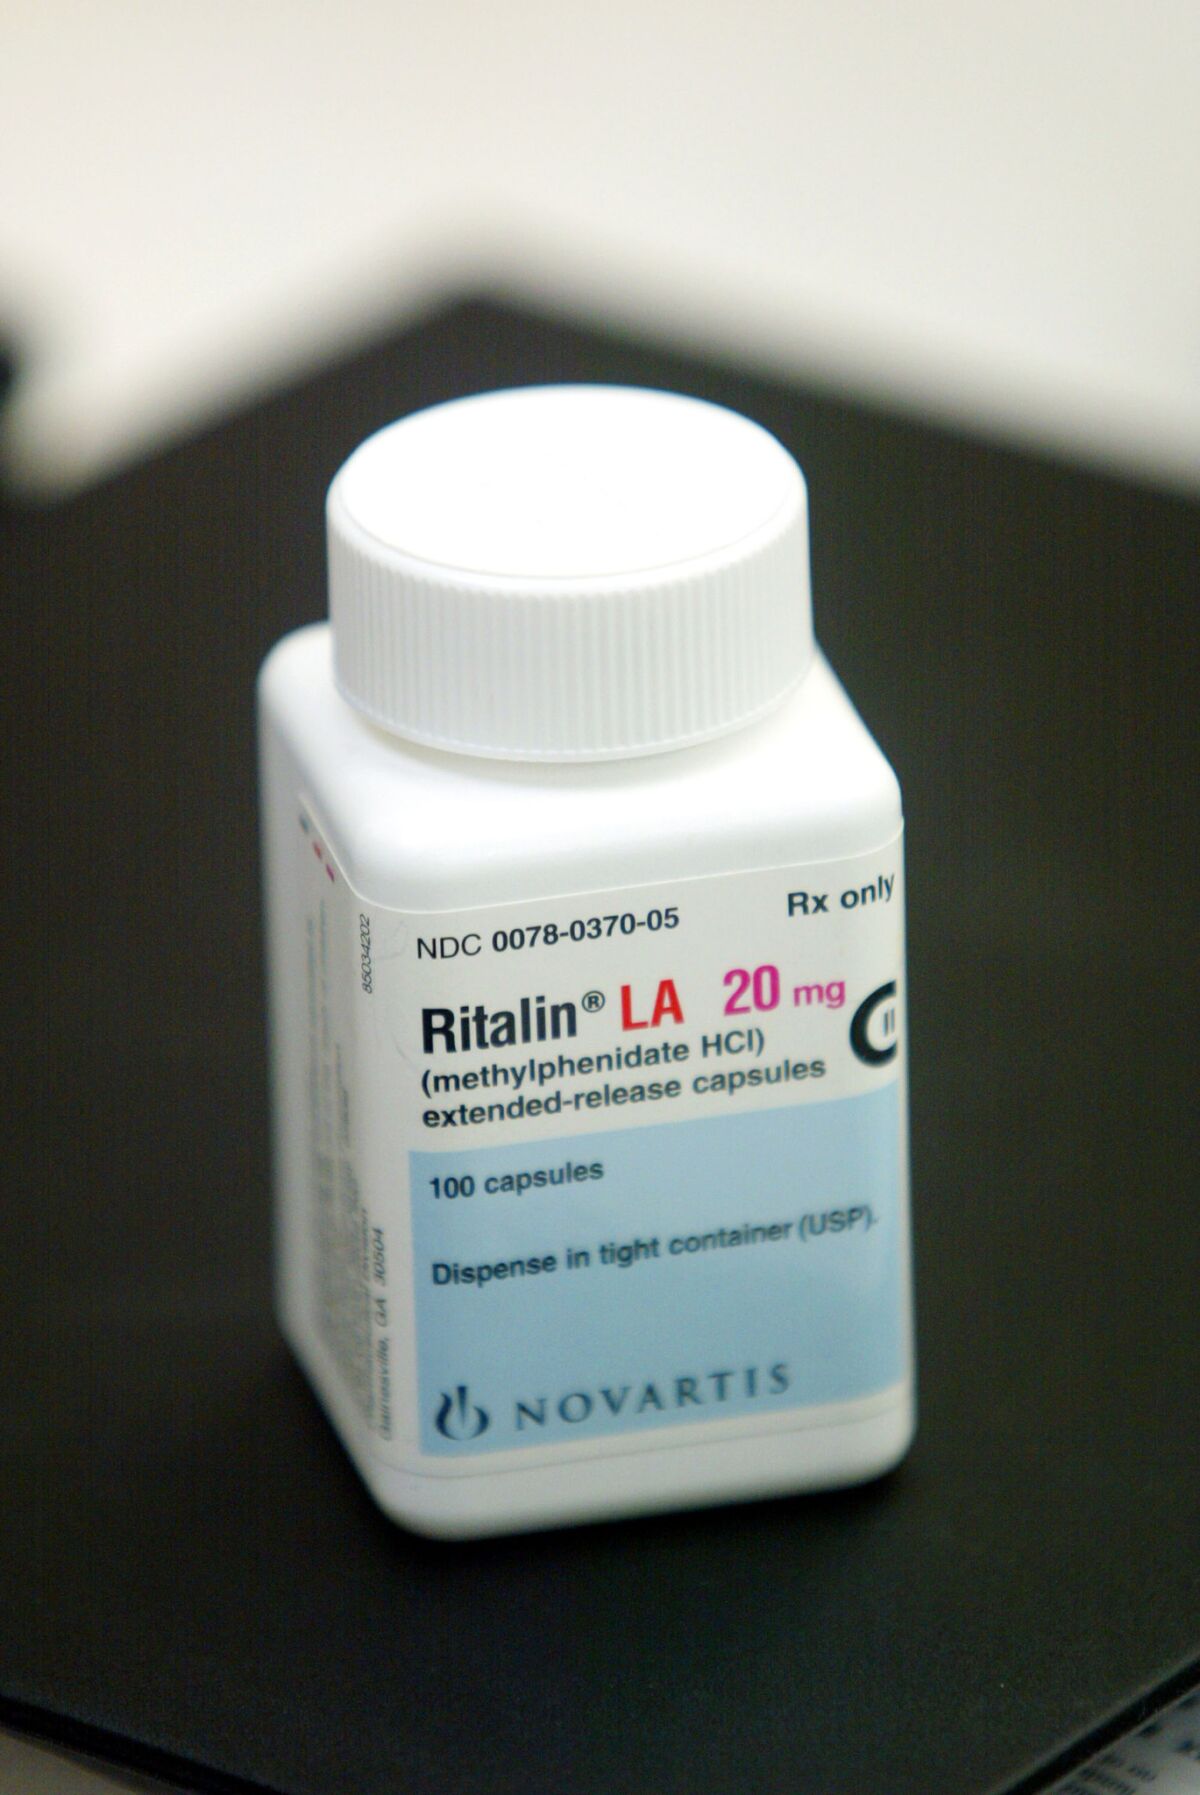 Defense Department researchers analyzing data from nearly 26,000 service members found that those with prescriptions for stimulants including Ritalin were five times more likely to have PTSD.